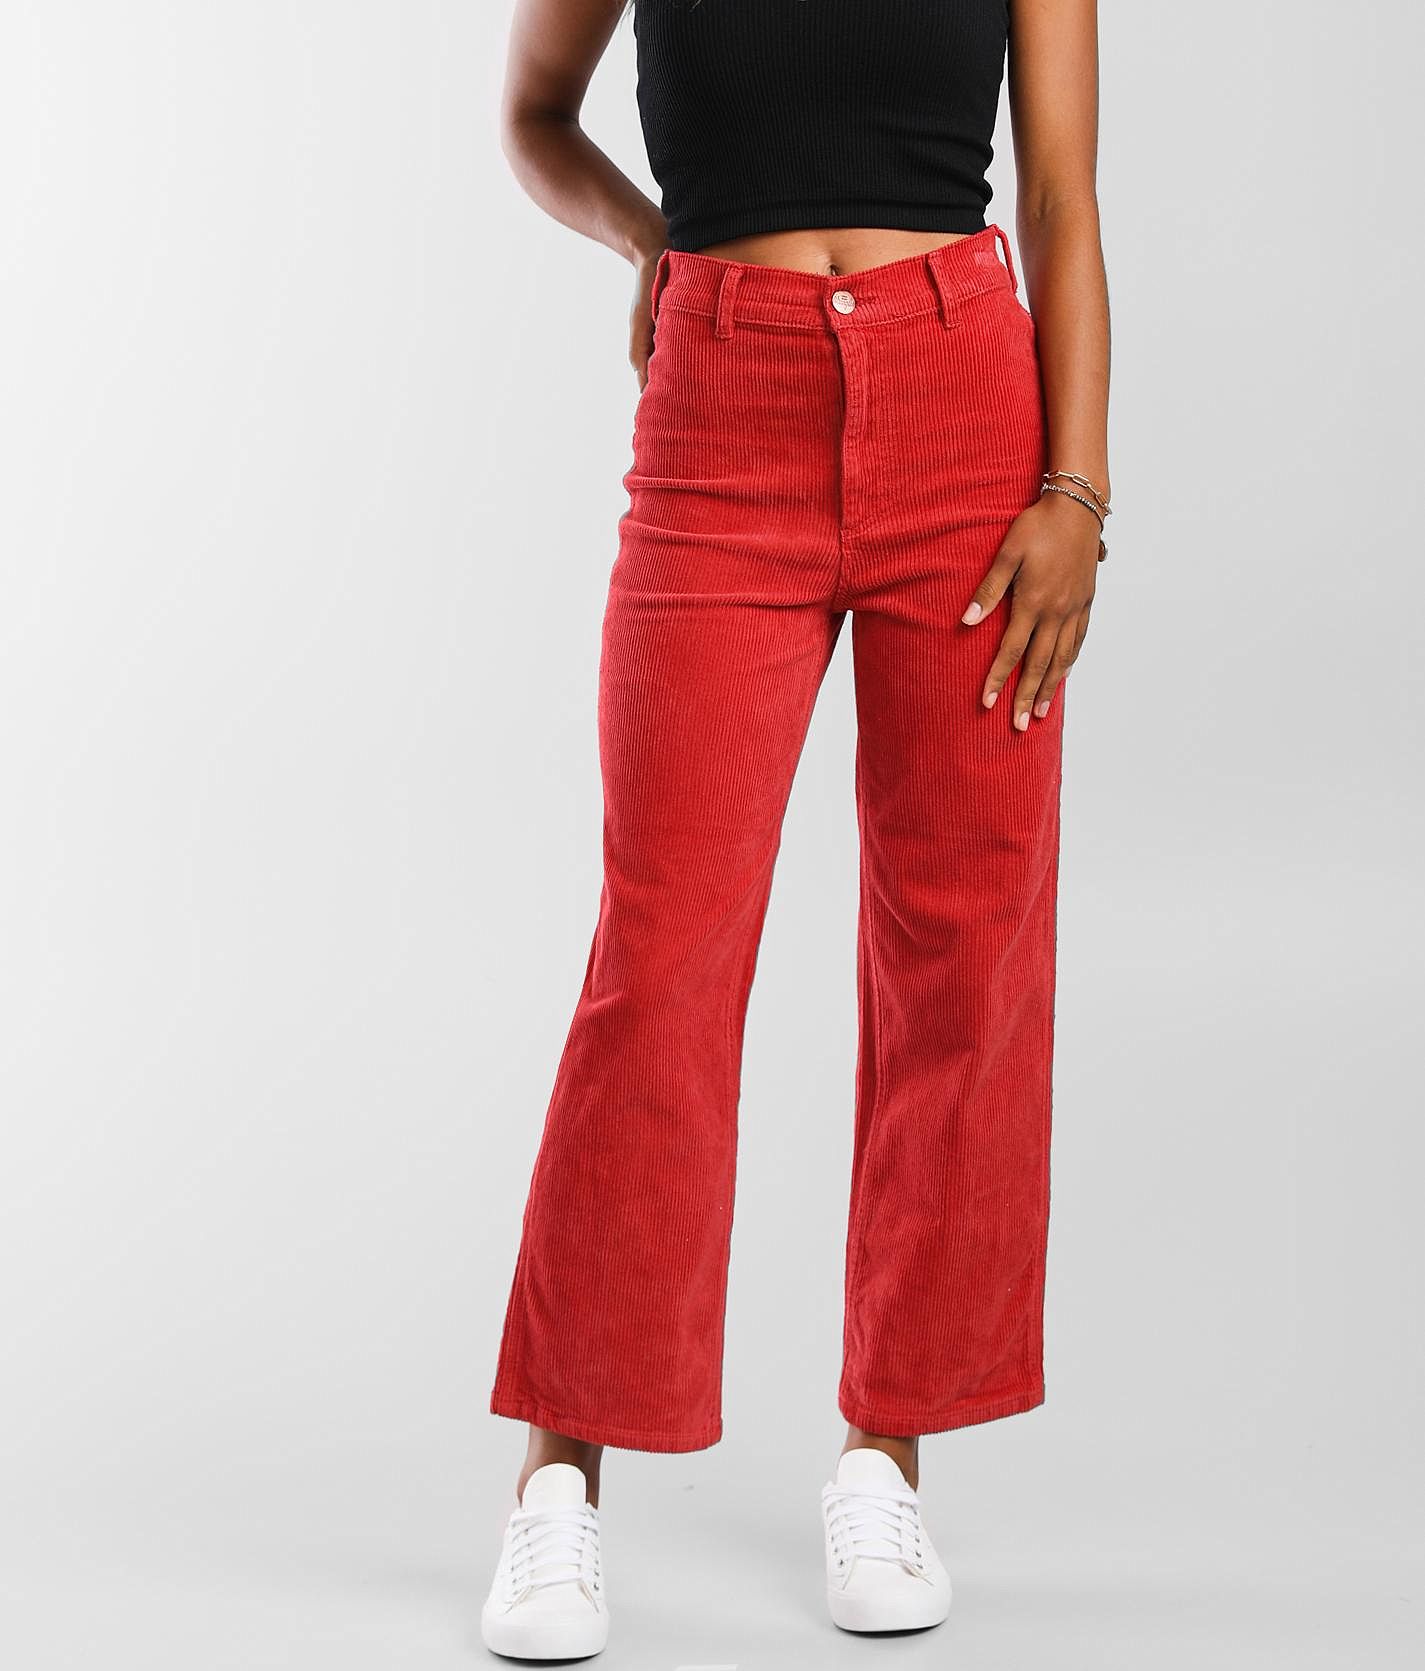 Billabong The Retro Corduroy Straight Stretch Pant - Women's Pants in  Classic Red | Buckle